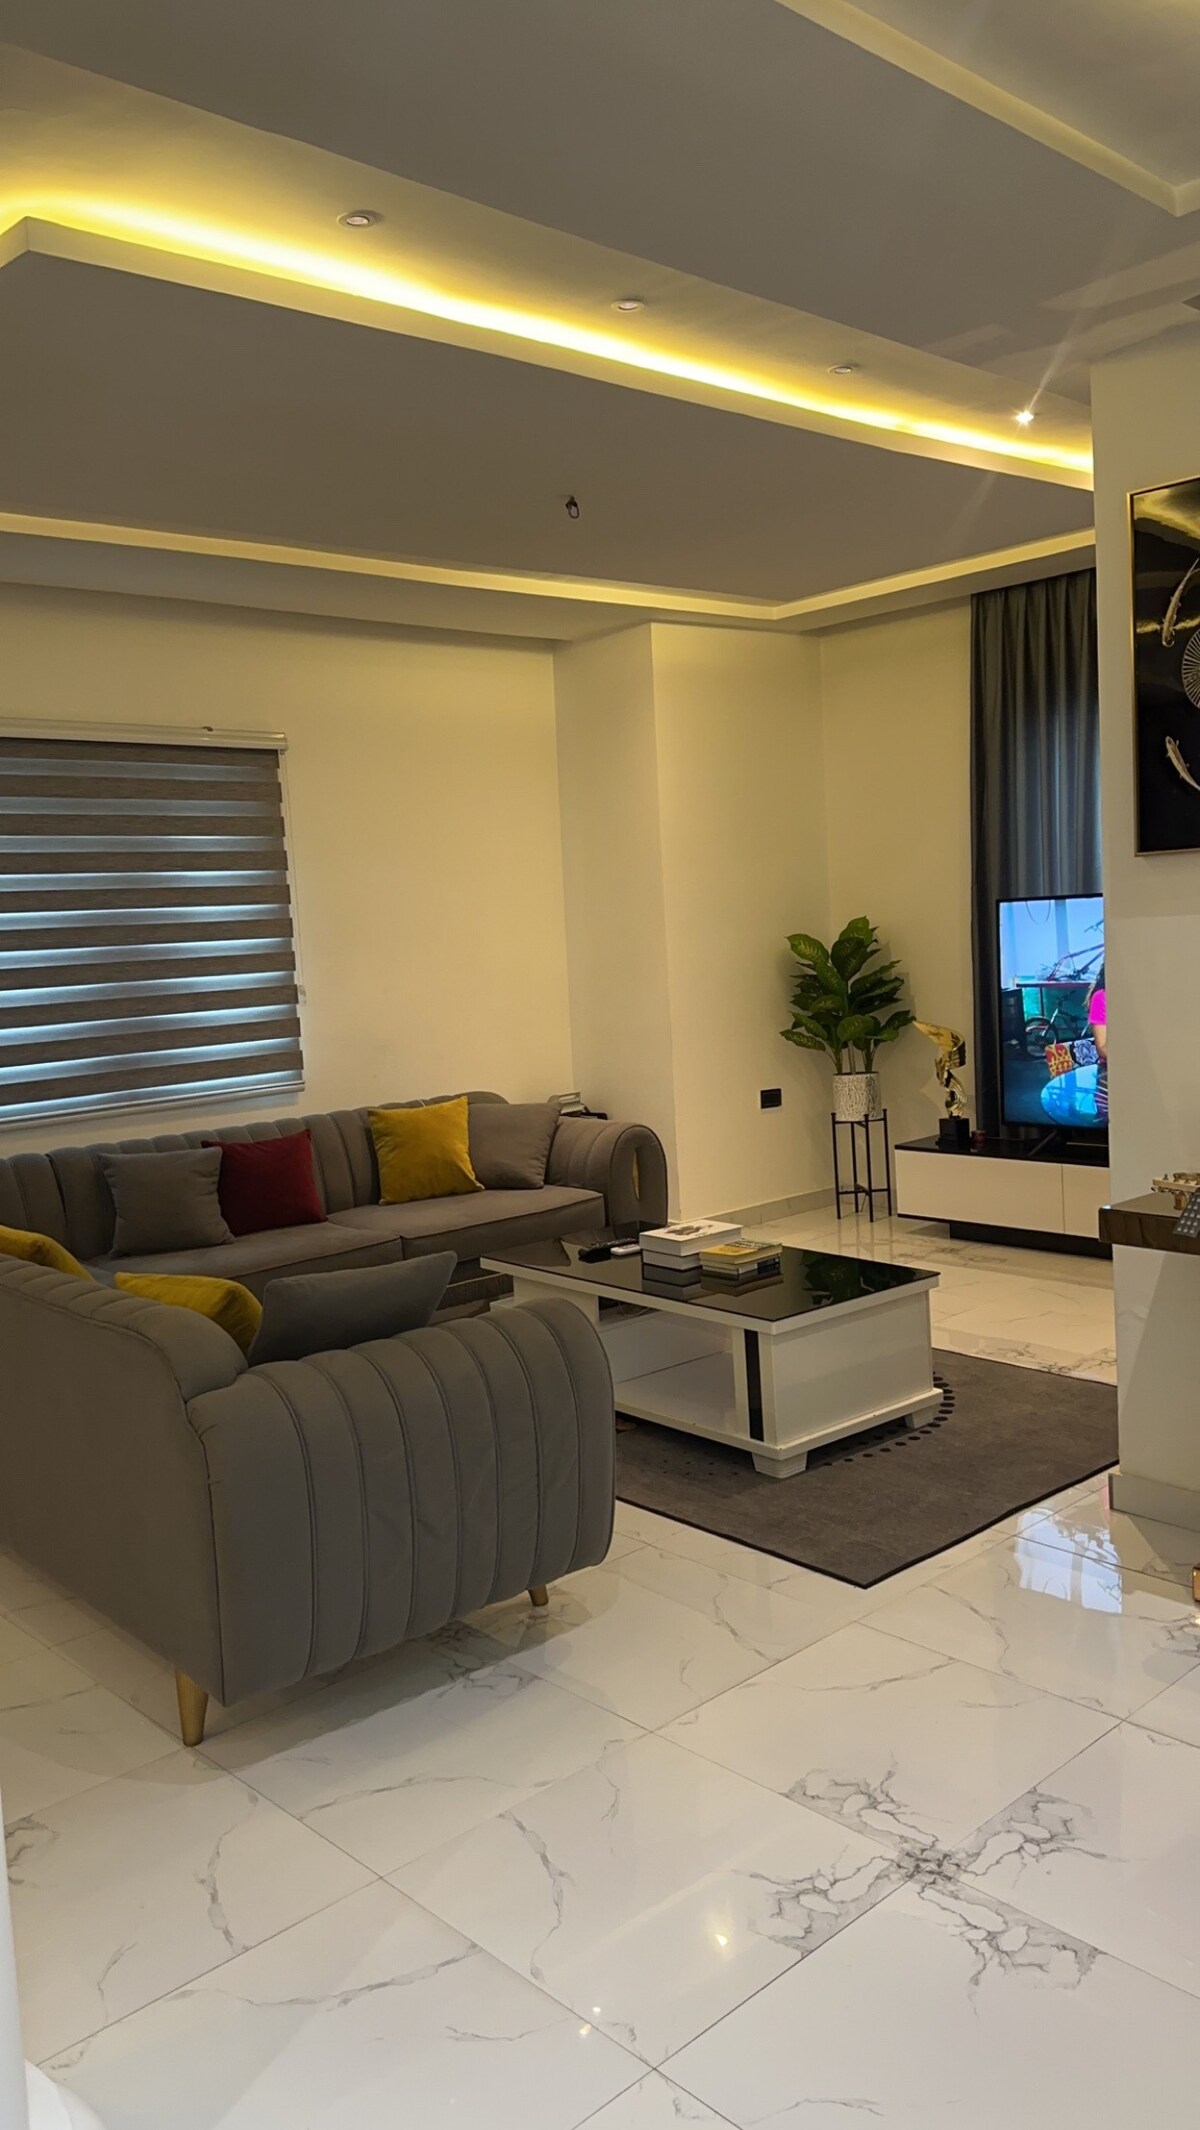 Modern fully furnished apartment